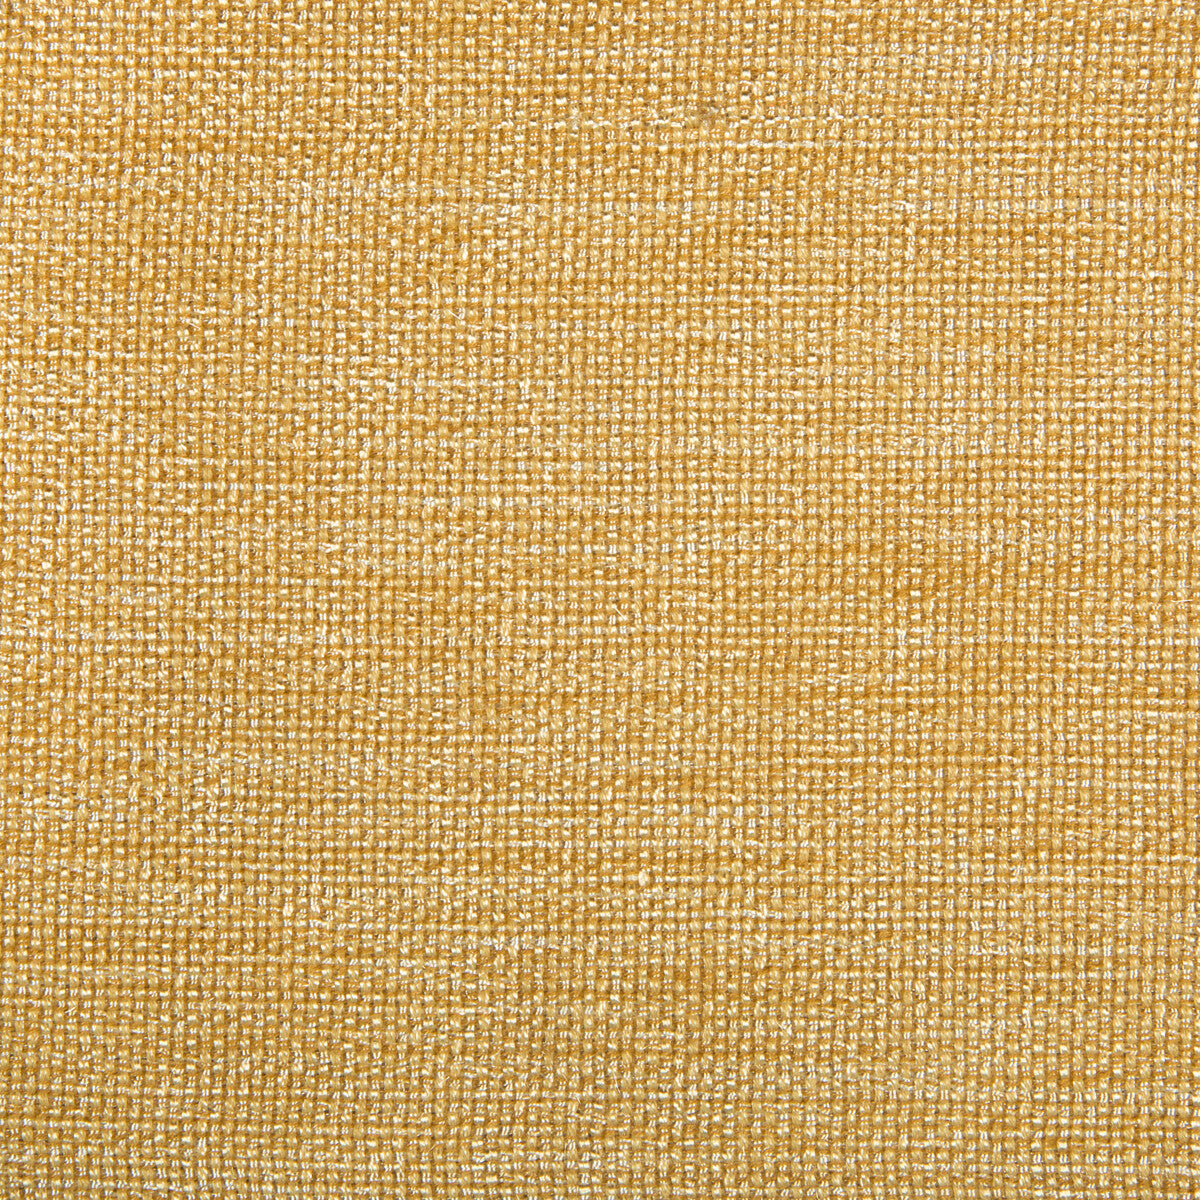 Kravet Contract fabric in 34926-4 color - pattern 34926.4.0 - by Kravet Contract